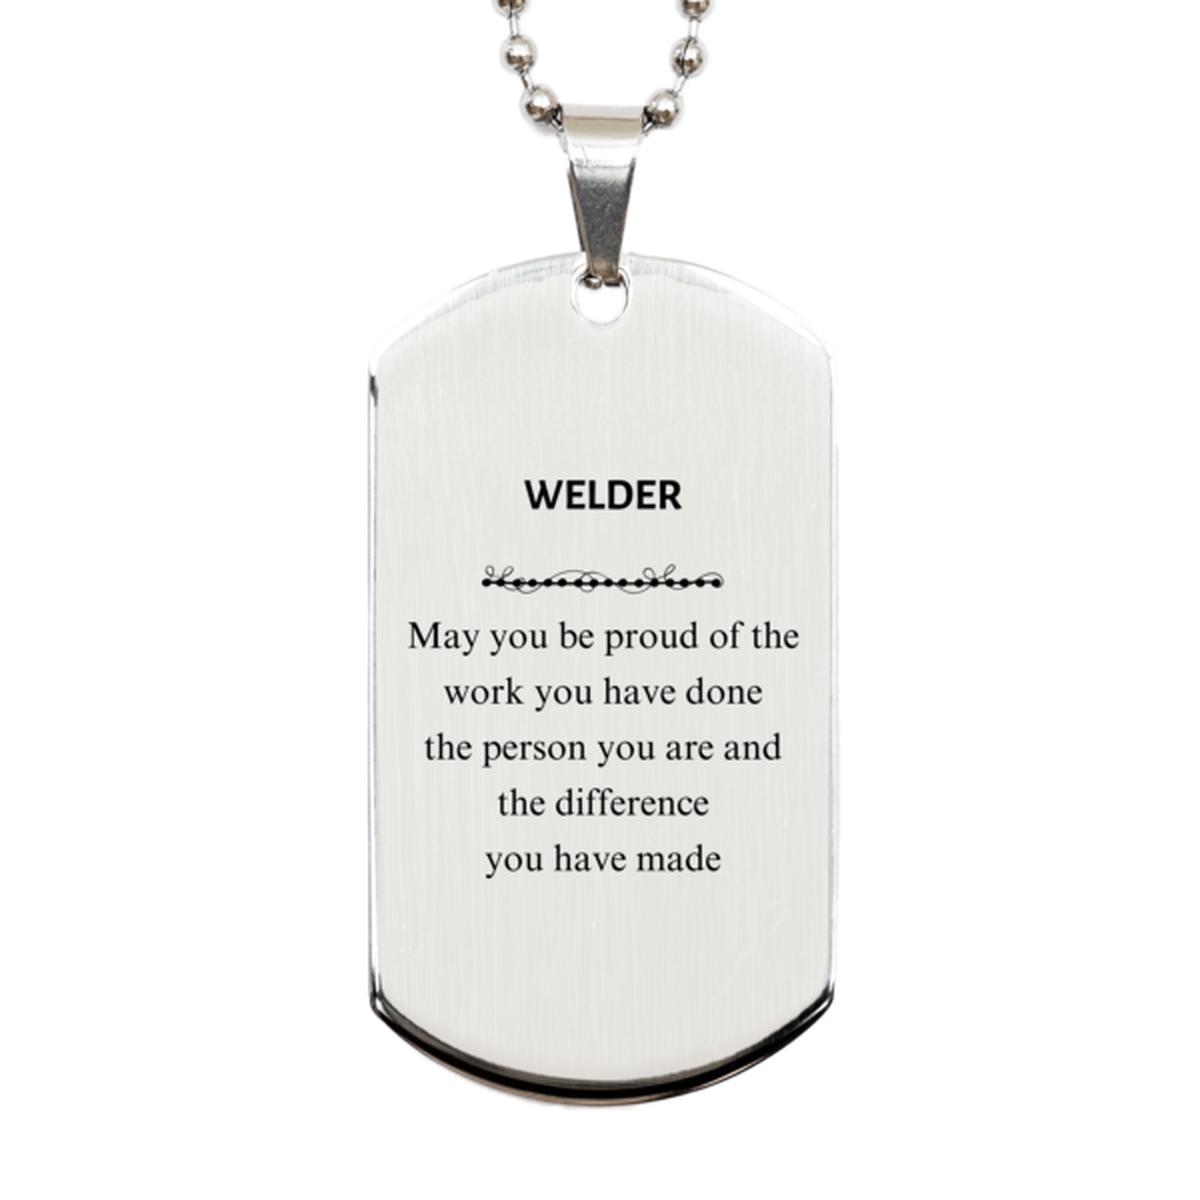 Welder May you be proud of the work you have done, Retirement Welder Silver Dog Tag for Colleague Appreciation Gifts Amazing for Welder